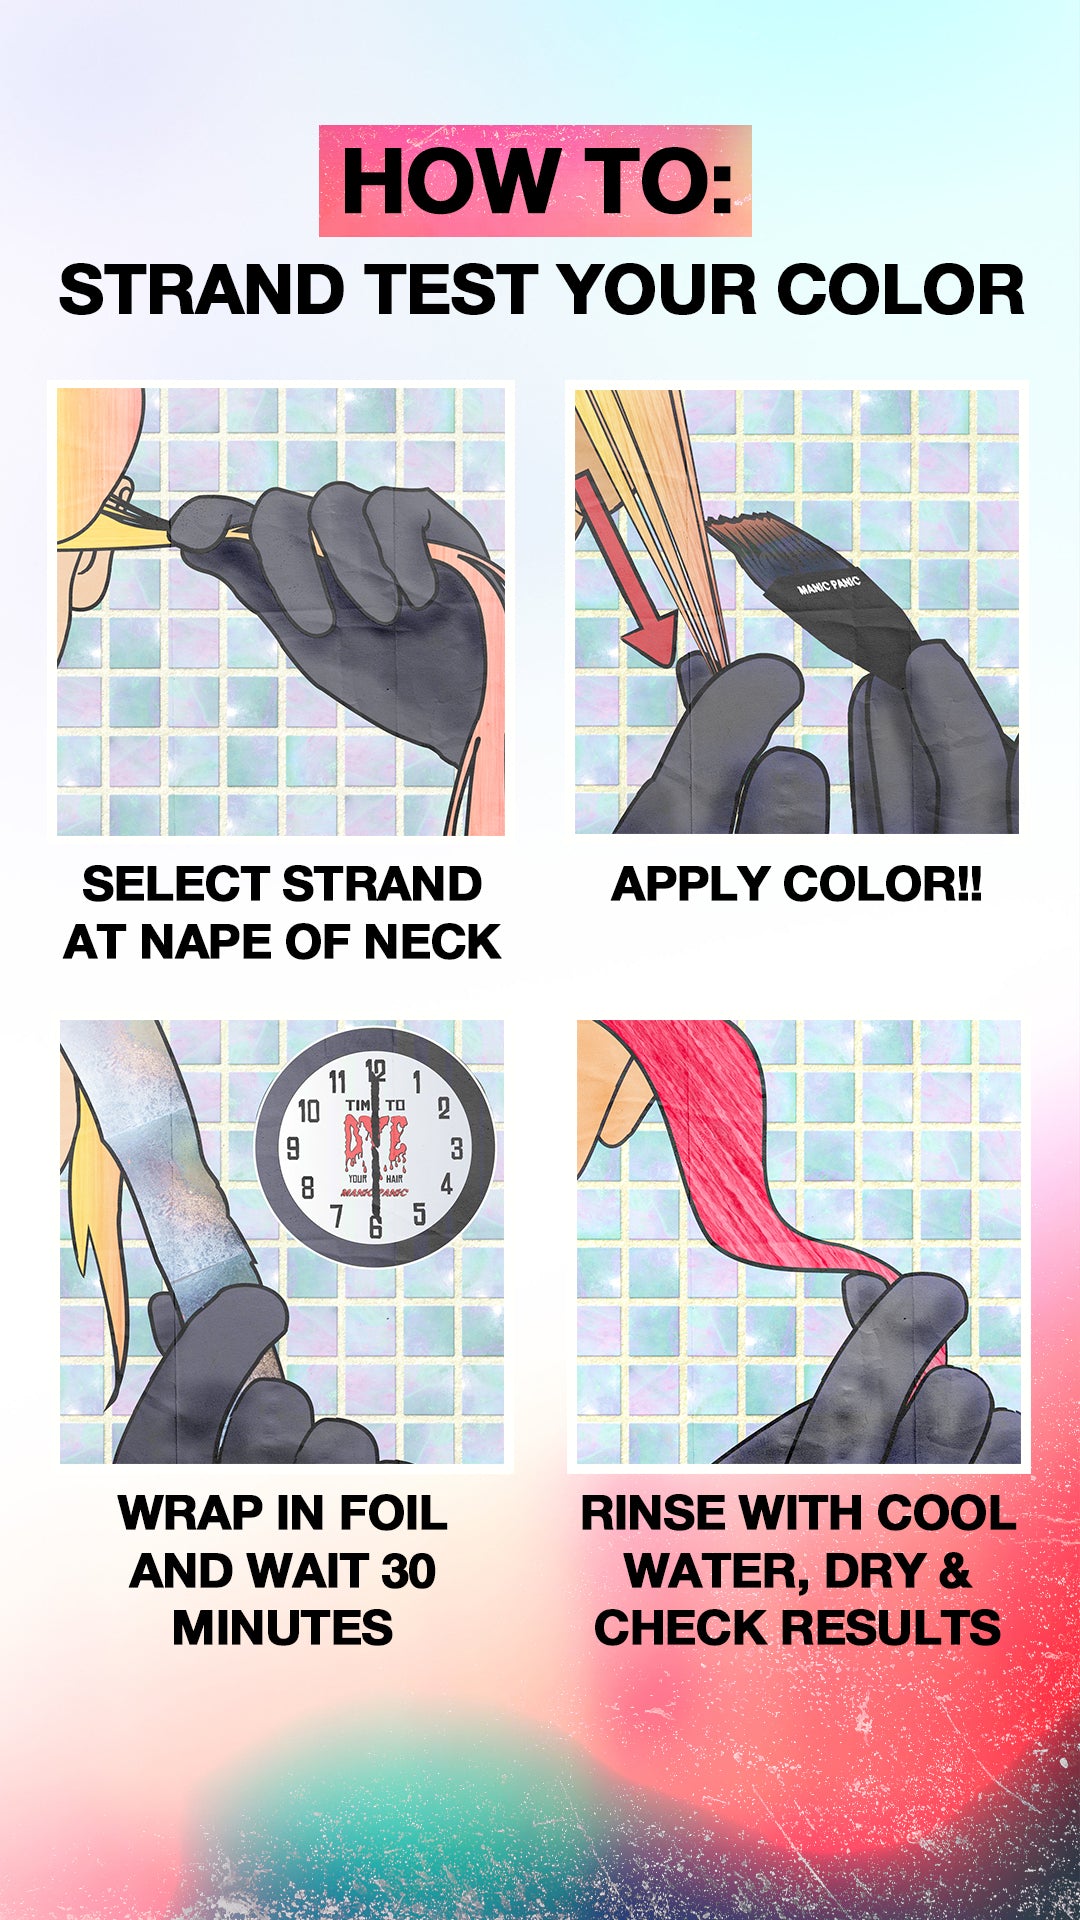 manic panic, how to strand test your hair, hair dye, hair color, test, hair color test,